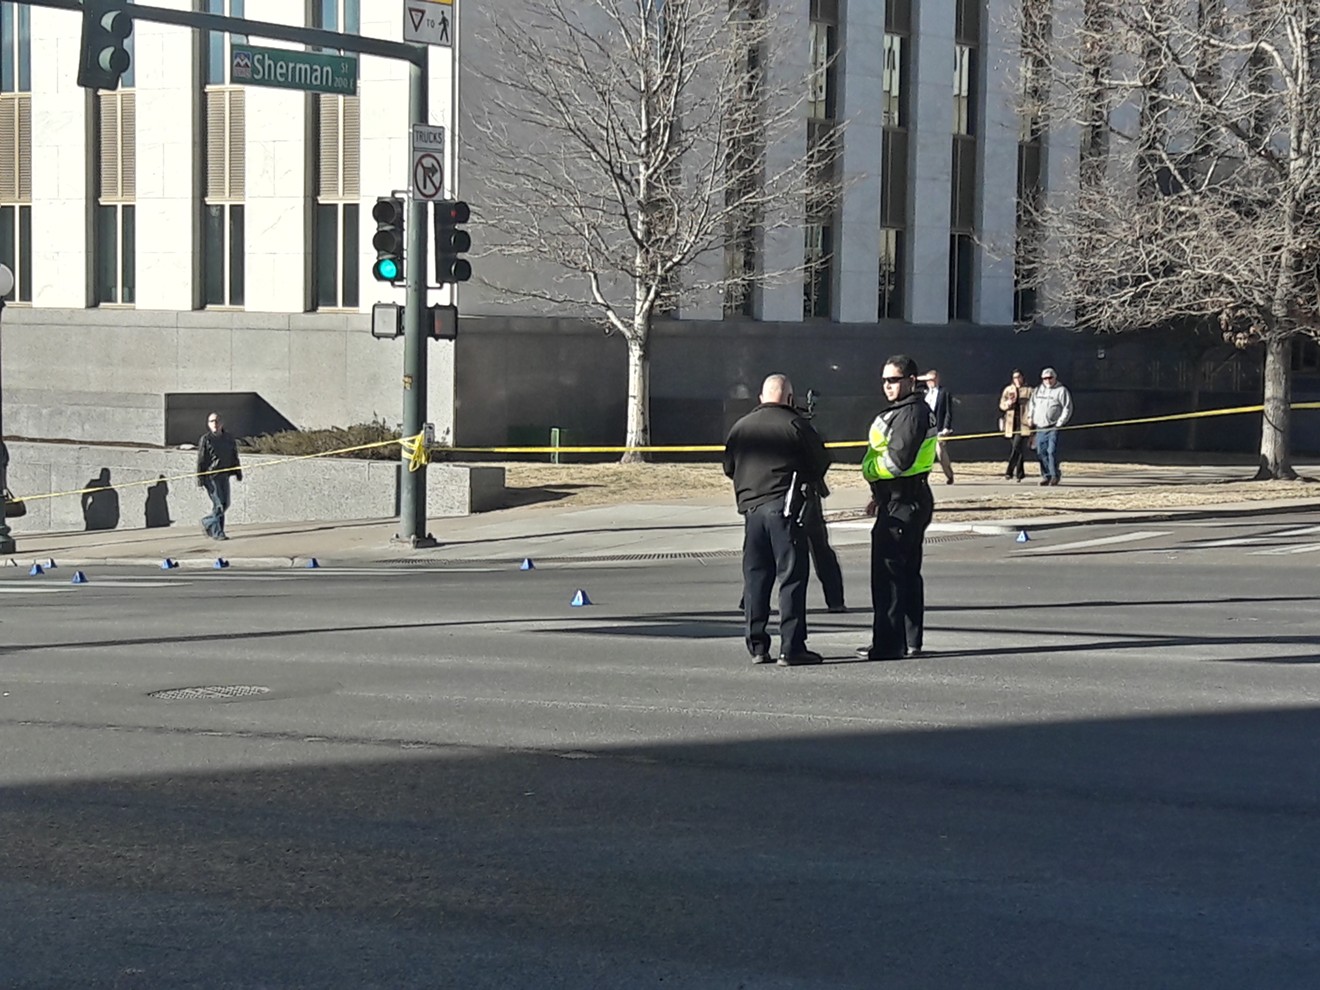 Police scattered blue triangles marking crime-scene evidence near the Capitol.